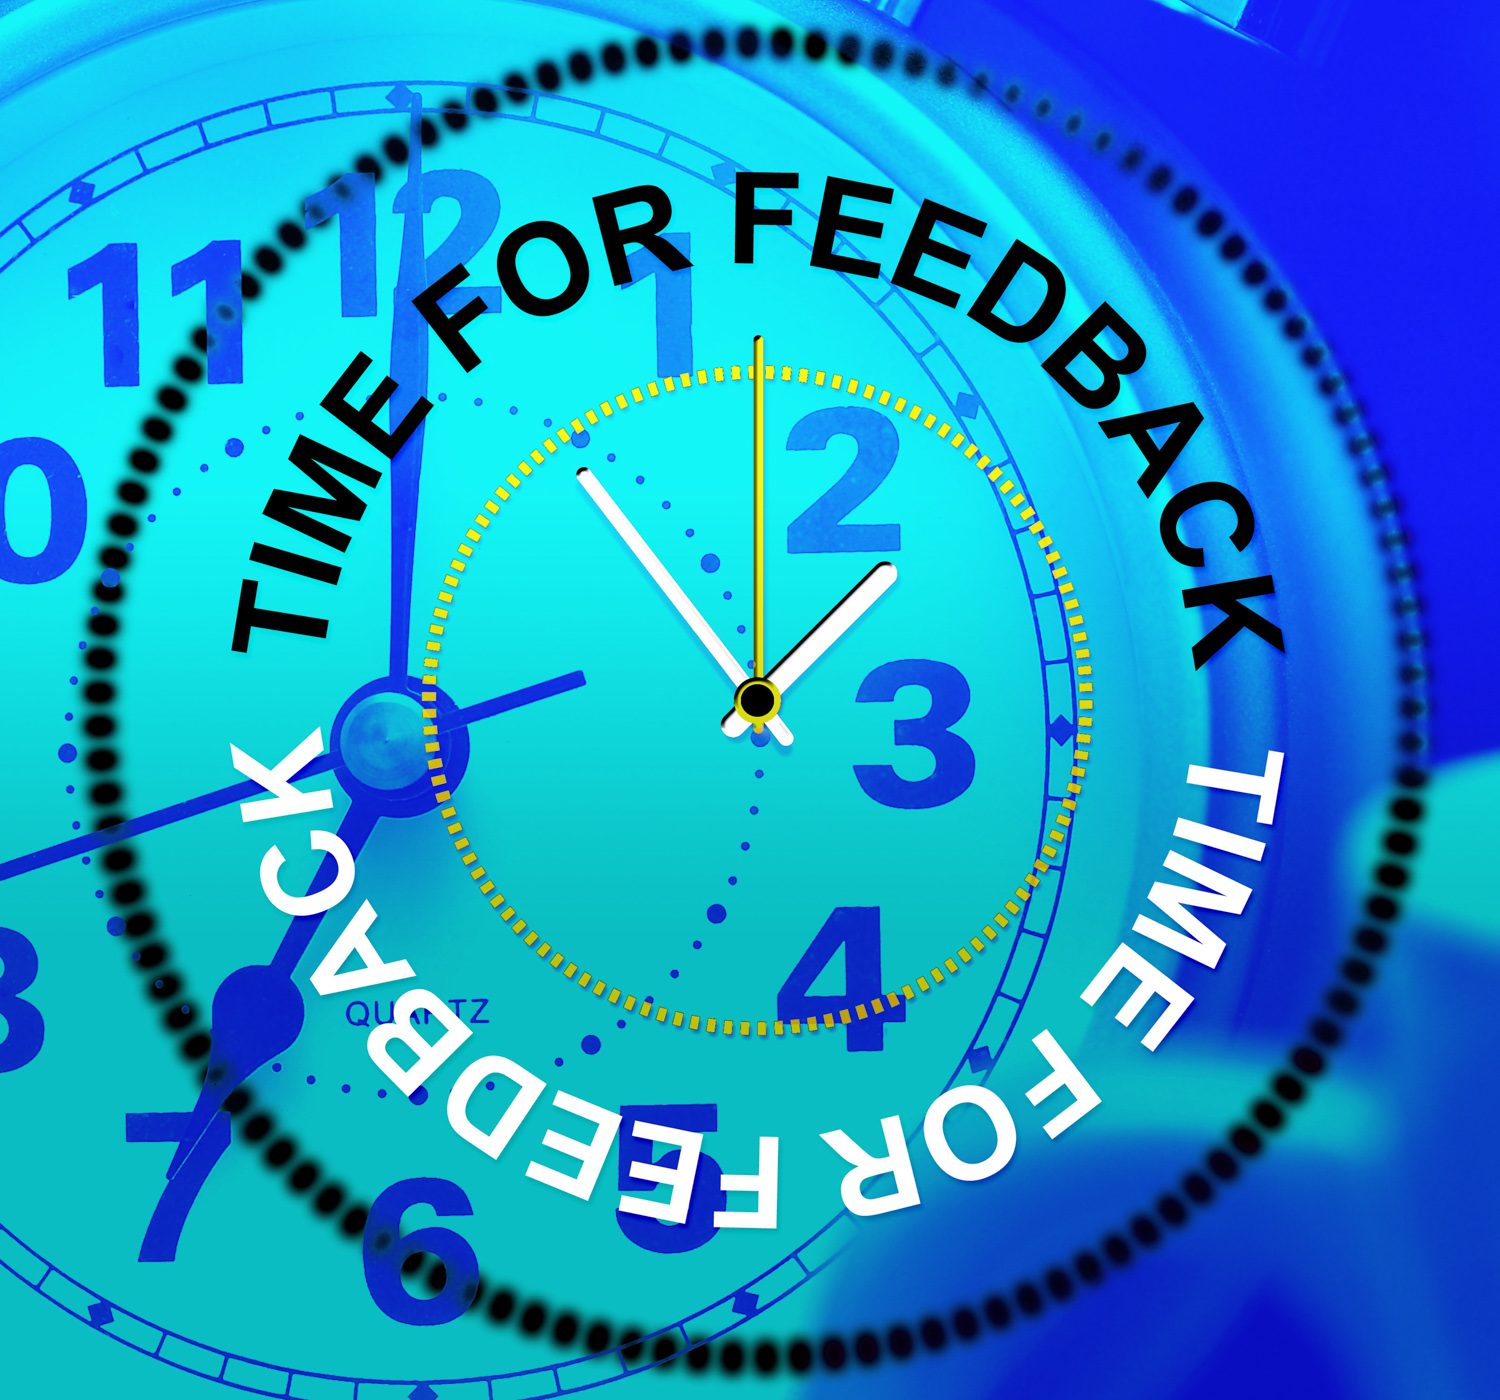 Time for feedback shows response comment and survey photo